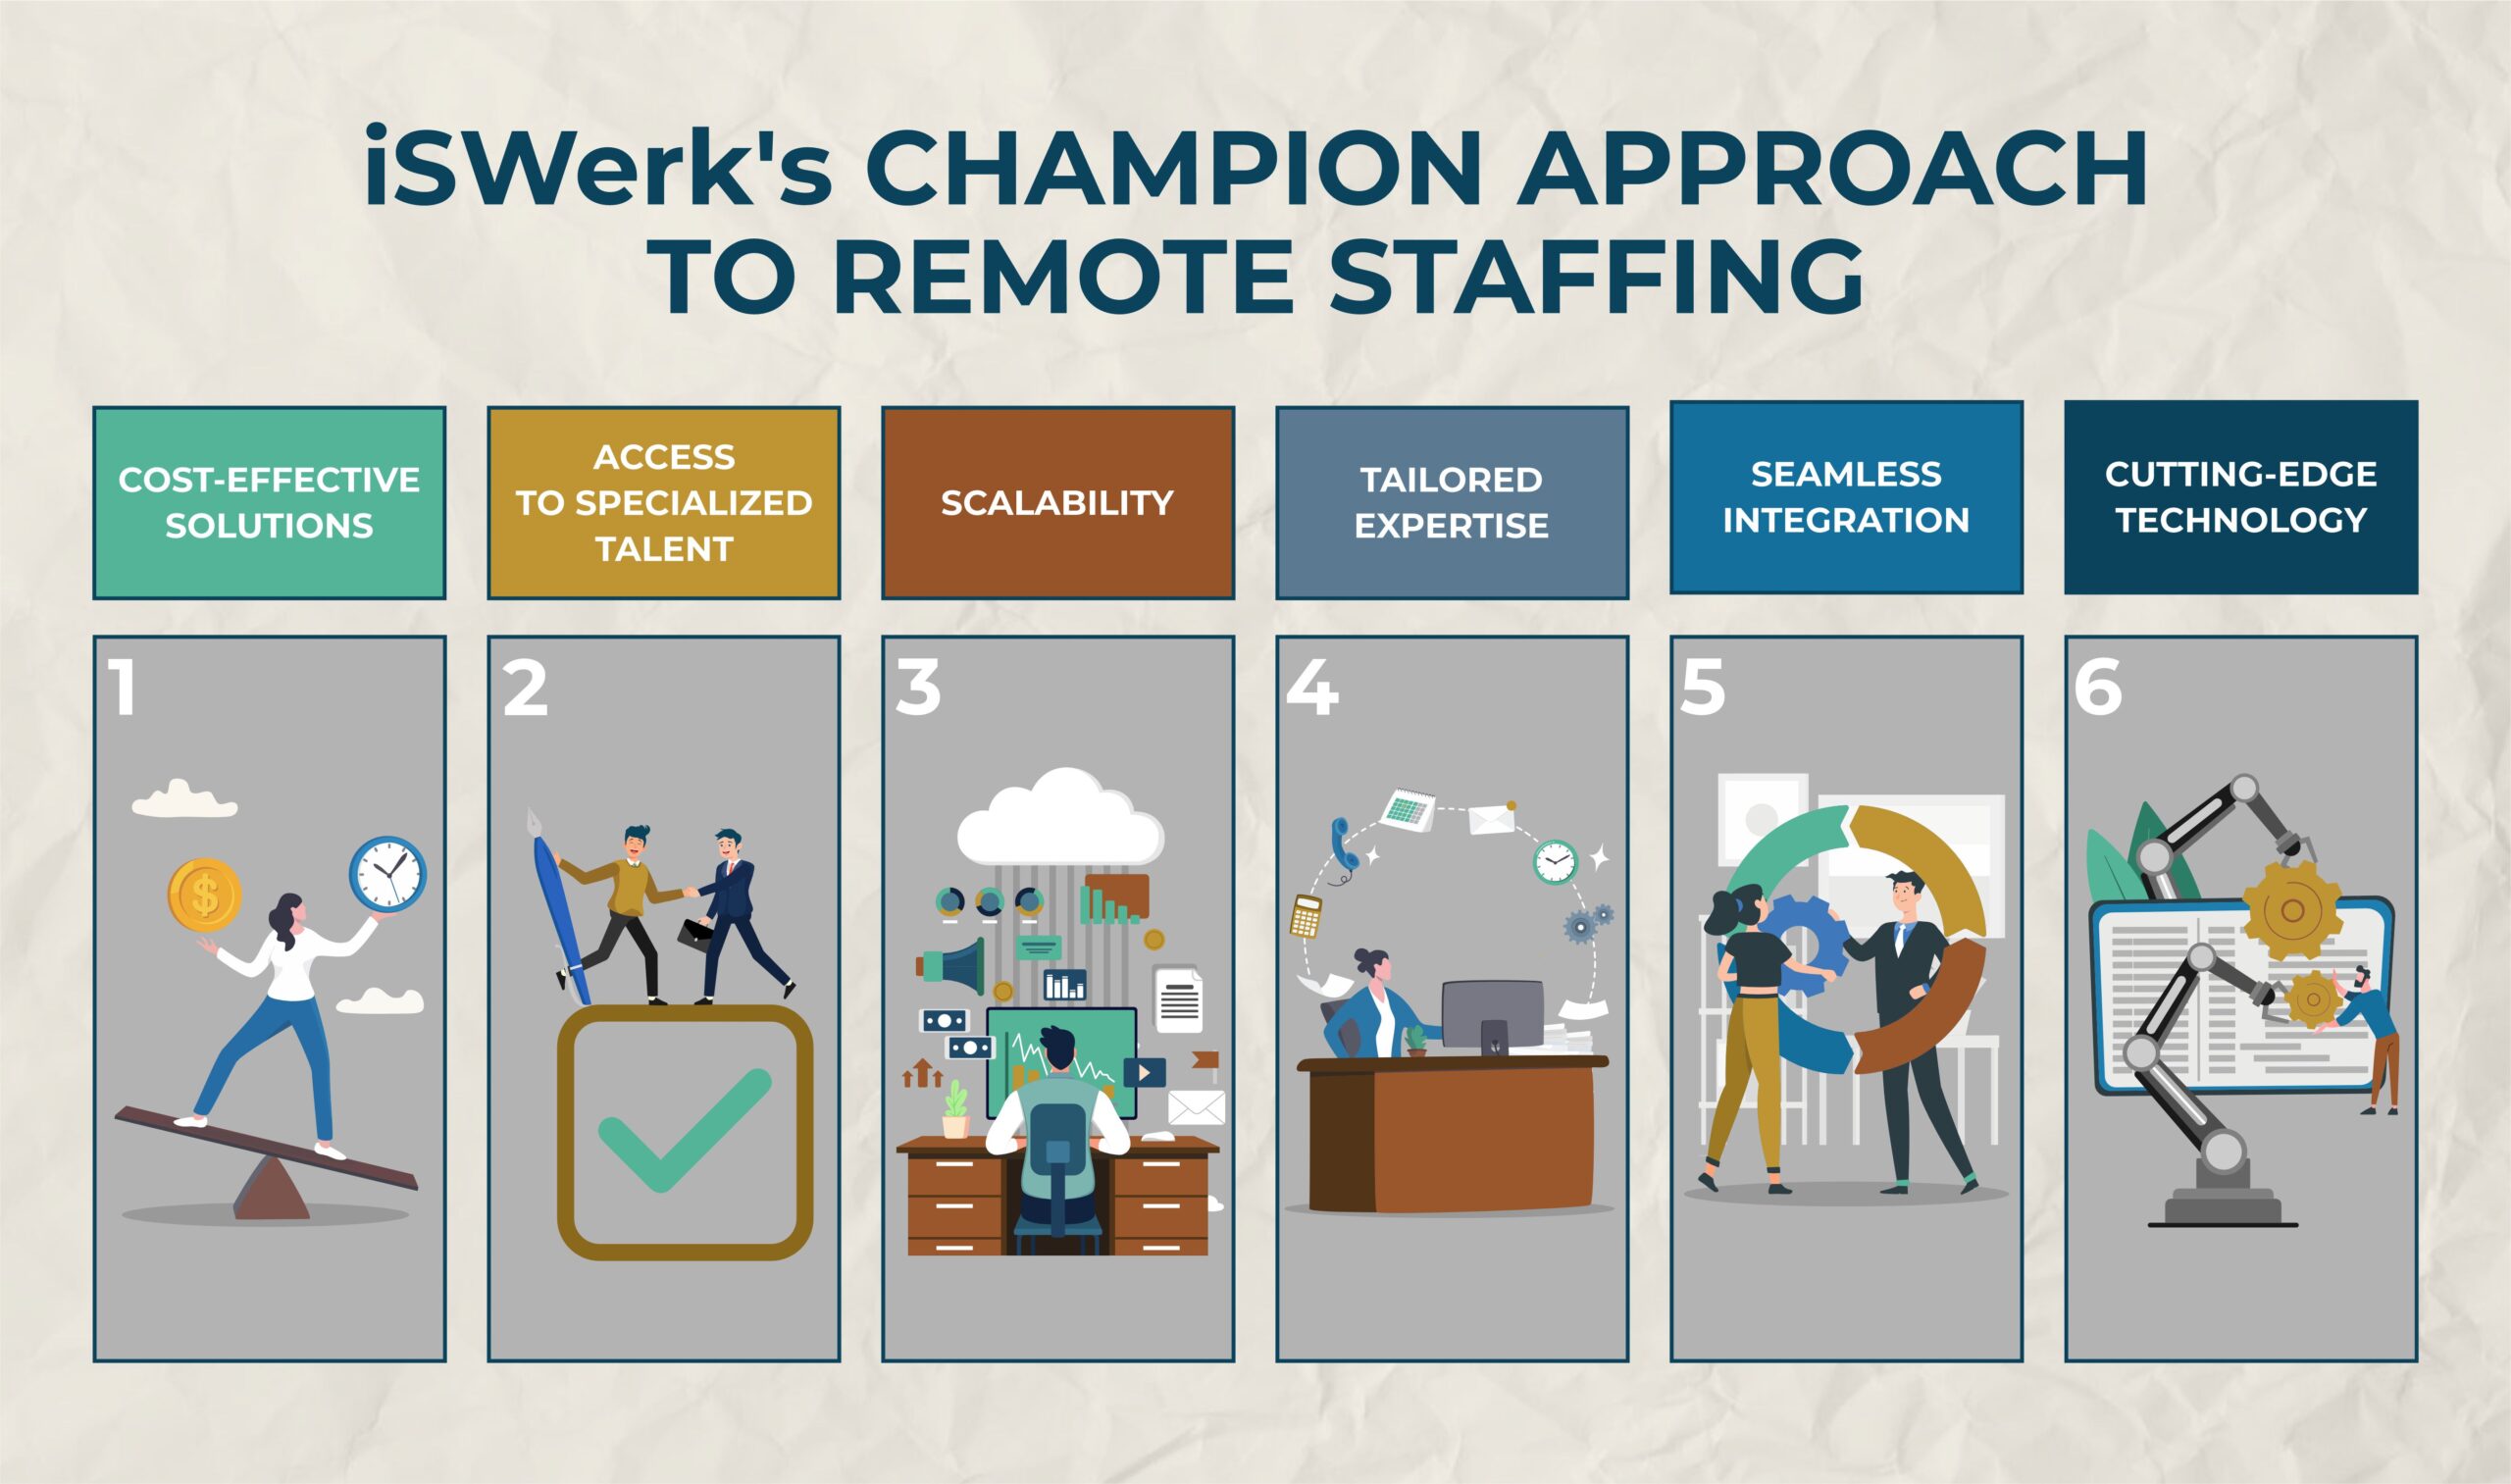 iSWerk's Champion Approach to Remote Staffing - iSwerk.ph